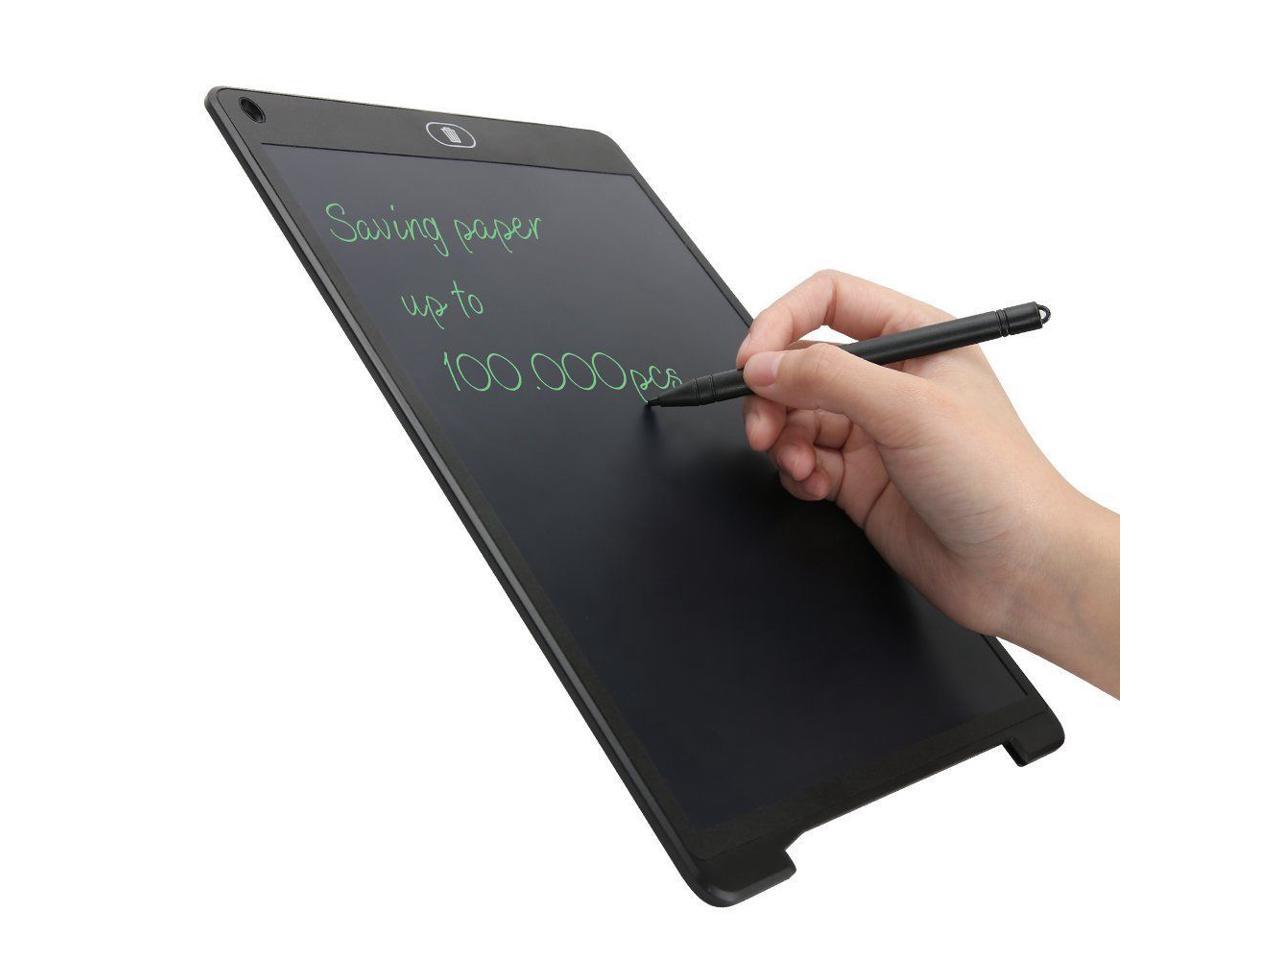 10 inch Colorful Screen Electronic Drawing Pads for Kids Fridge or Office Portable Reusable Ewriter Digital Handwriting Paper Doodle Board for School KURATU LCD Writing Tablet Orange 